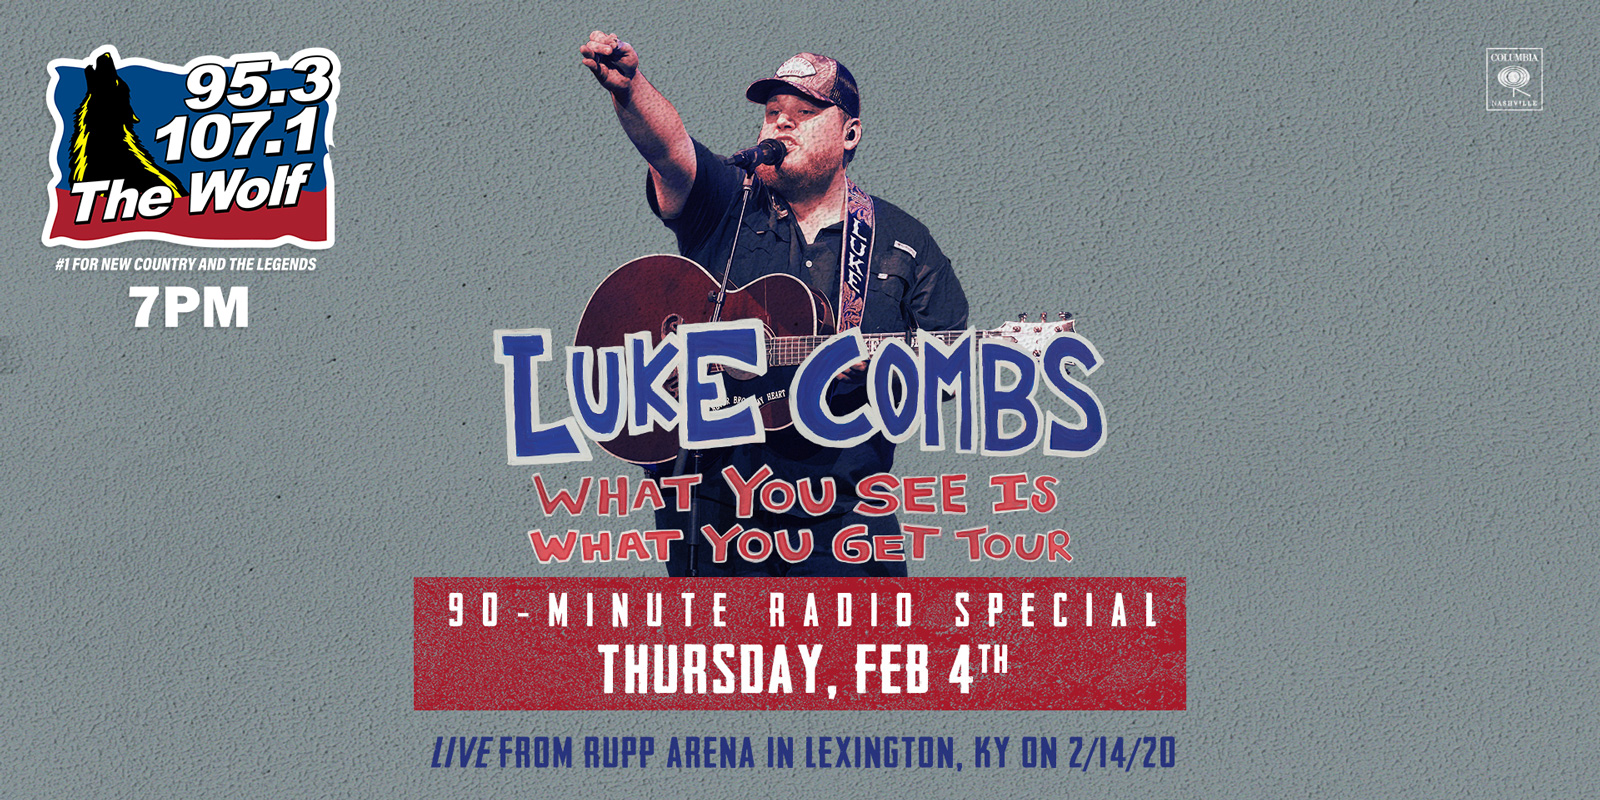 Luke Combs Concert Special Thursday February 4th at 7pm On The Wolf